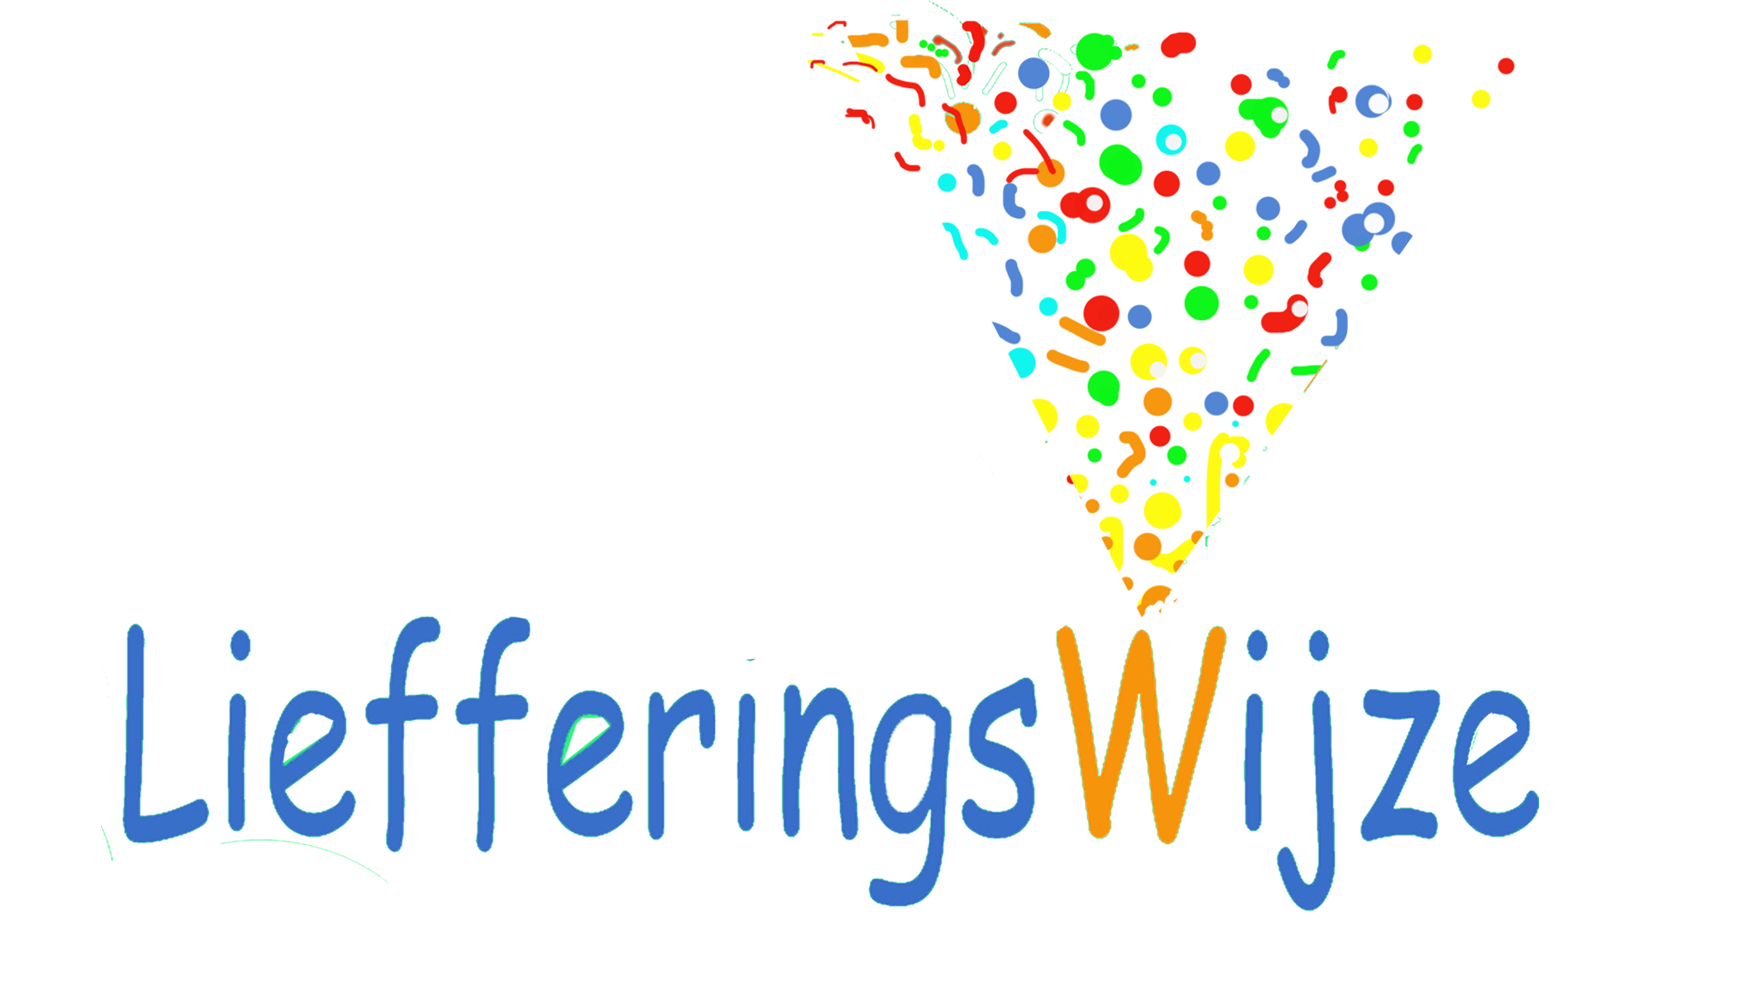 logo liefferingswijze .png at the lake